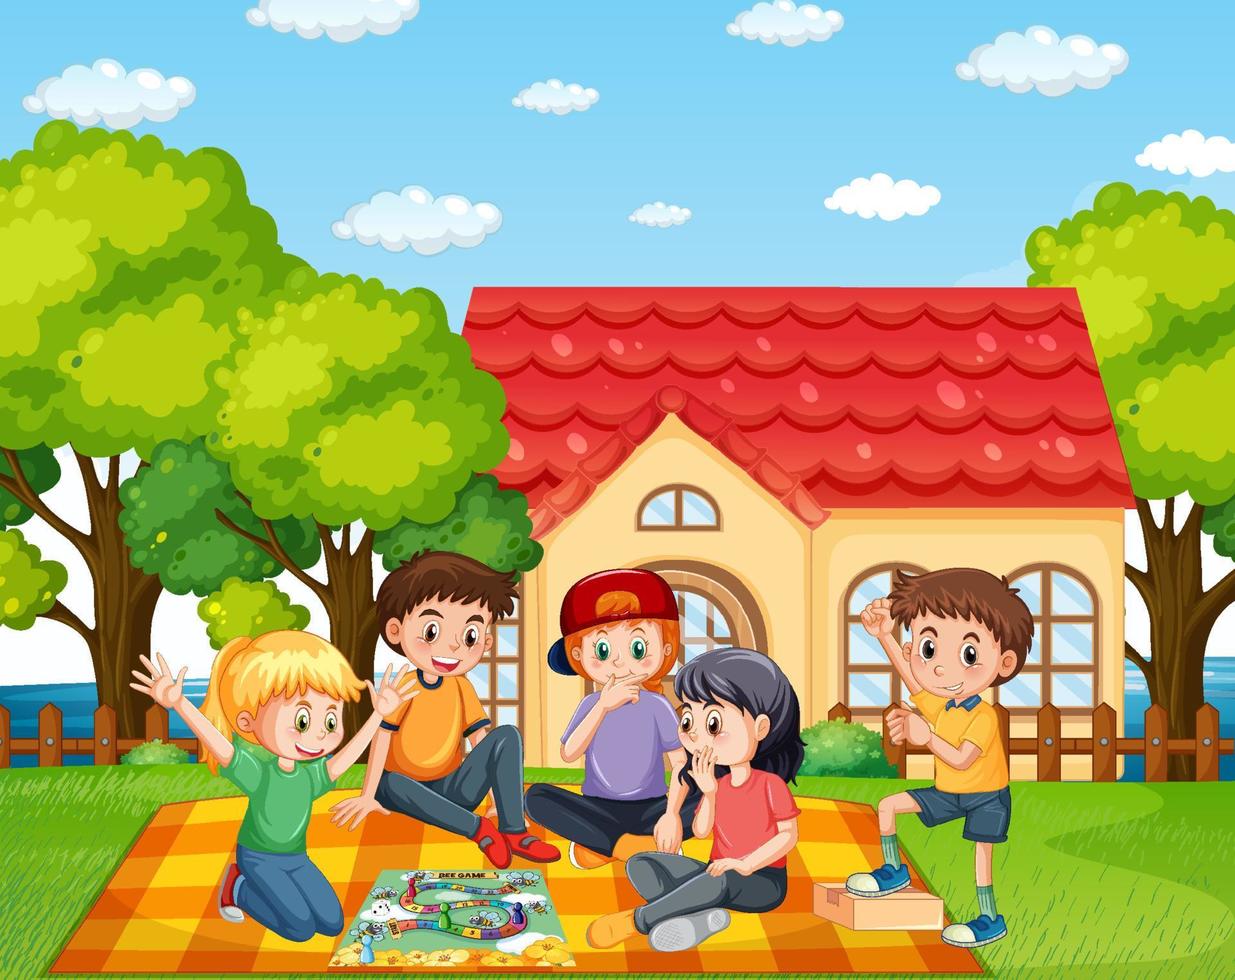 Children playing games outside the house vector